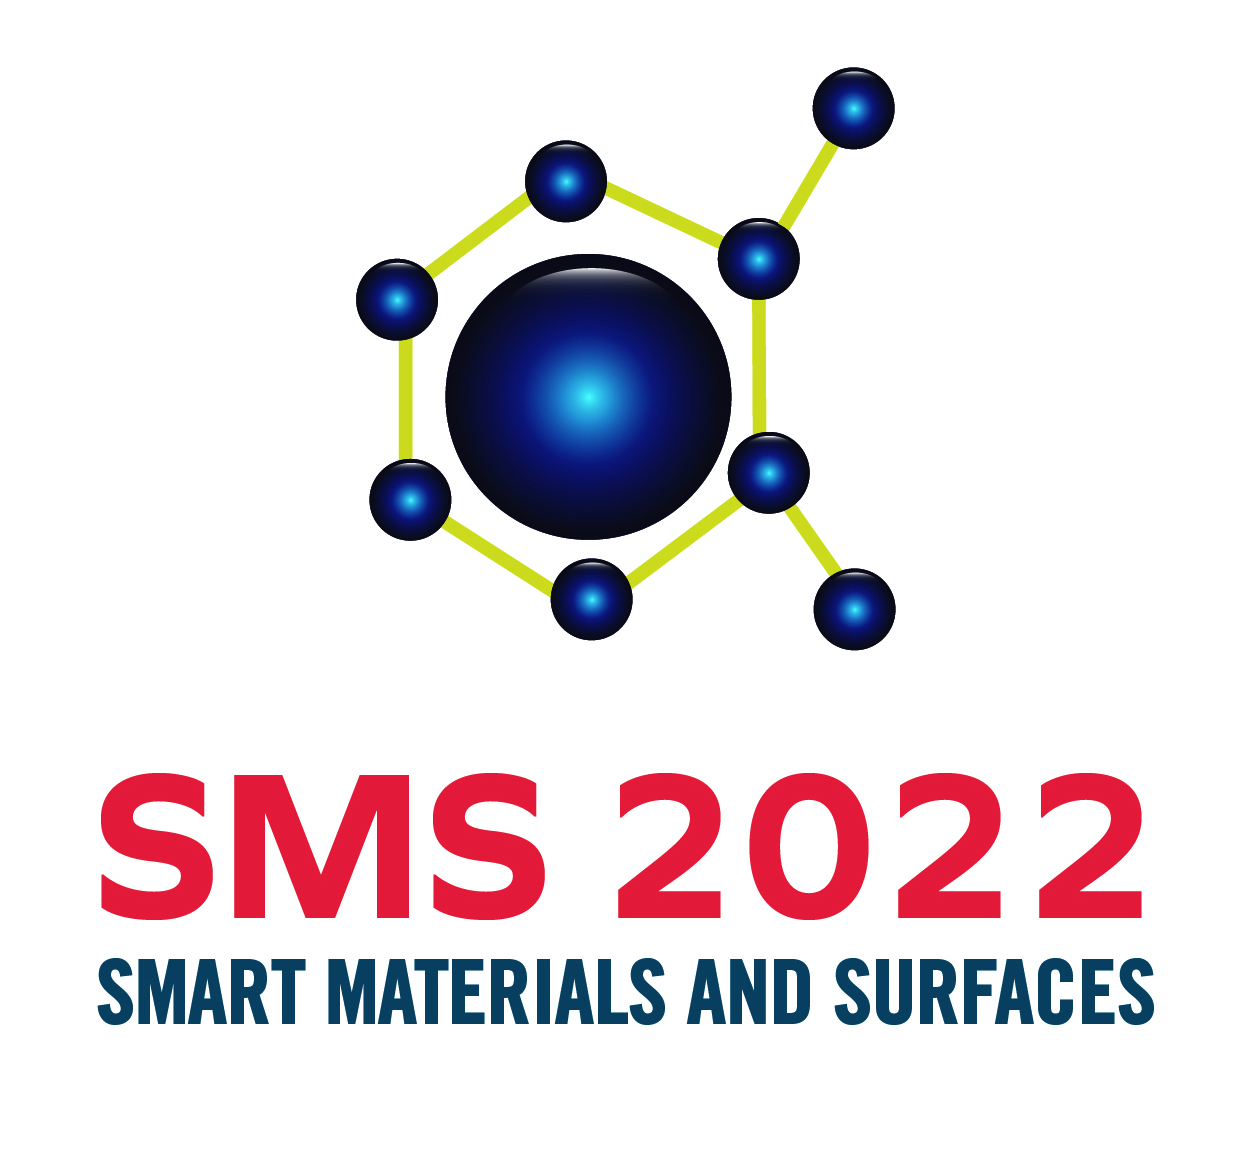 The 7th Ed. of the Smart Materials and Surfaces - SMS 2022 Conference